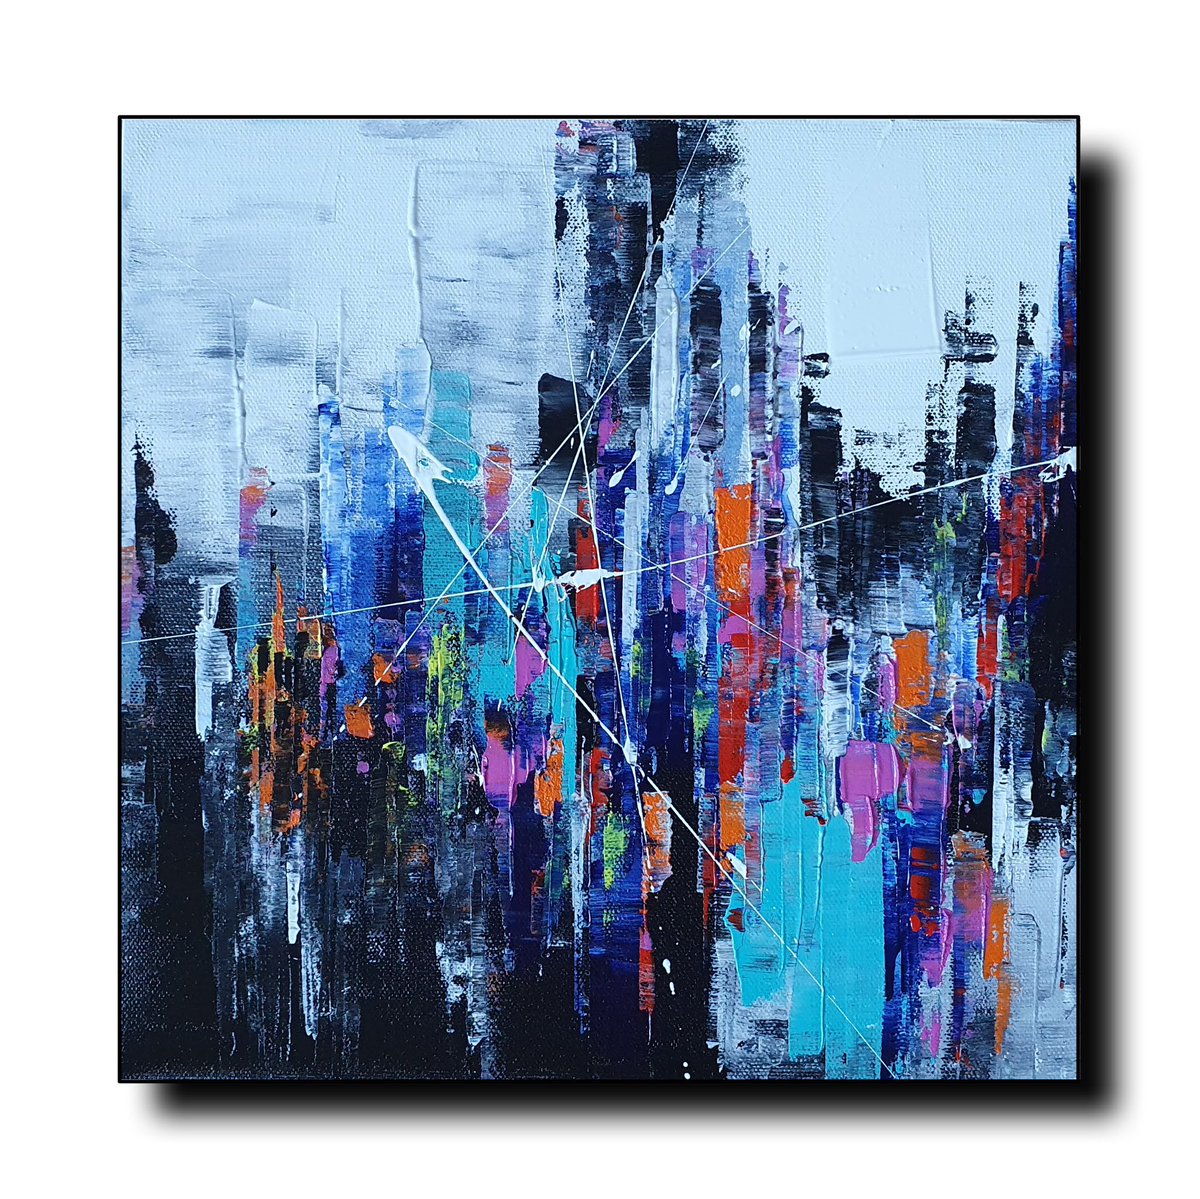 “Thunder”
Medium – Acrylic on Canvas
Size – 12×12 
Available type – Ready to Hang
.
.
.
.
#colourful 
#art
#paintings 
#instagram 
#acrylic
#abstract
#abstractpainting 
#acrylicpainting 
#arttoronto 
#markhamartist 
#artlovers 
#abstractlovers 
#abstraction